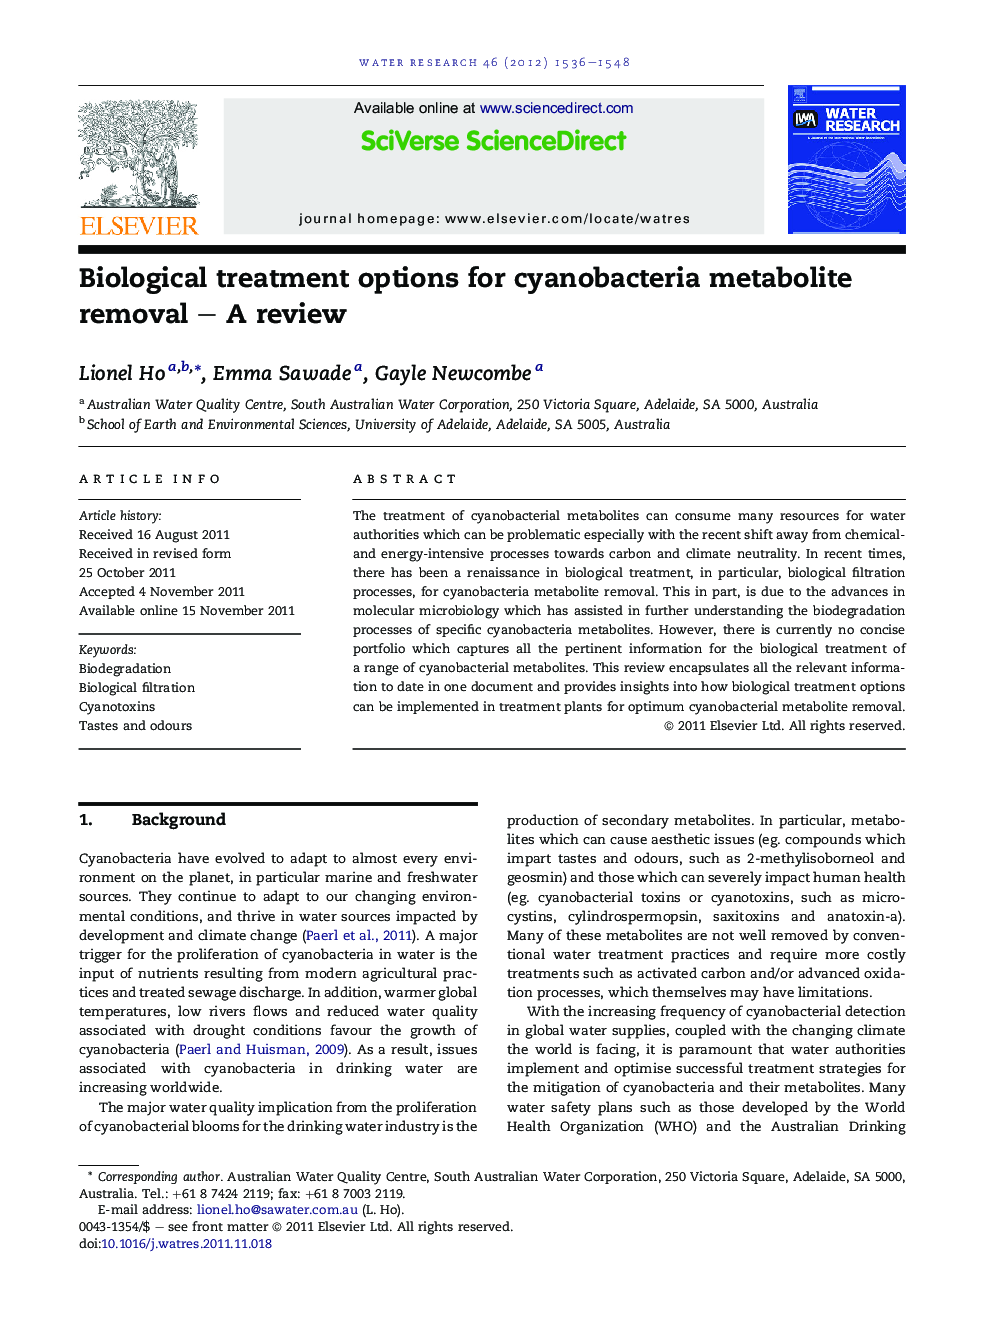 Biological treatment options for cyanobacteria metabolite removal – A review